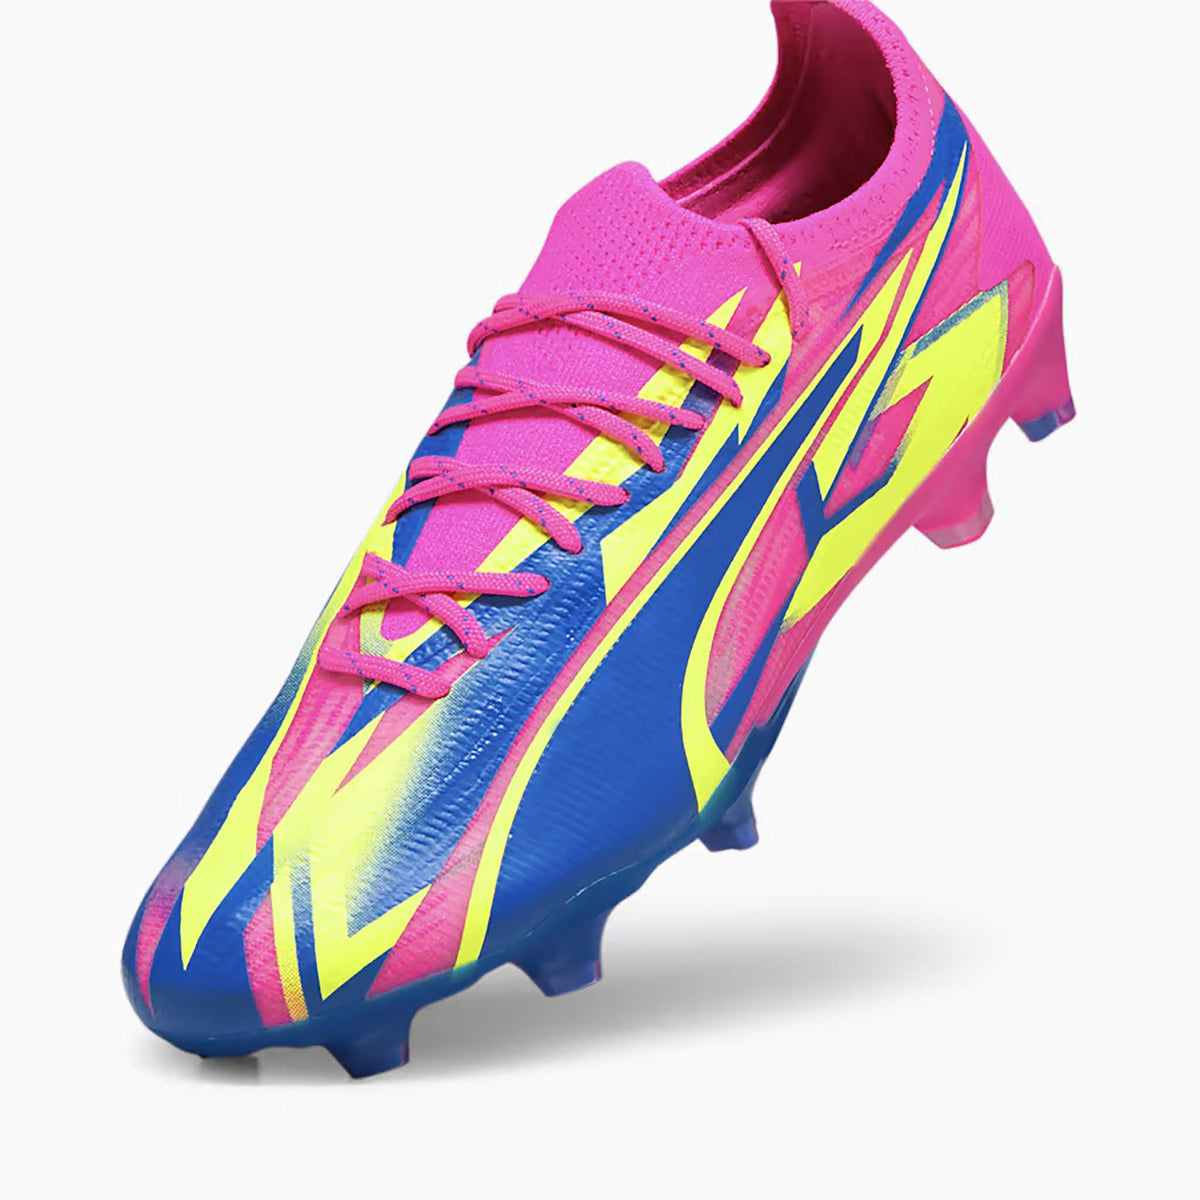 Puma Ultra Ultimate Energy FG/AG chaussures de soccer a crampons tige- Pink / Ultra Blue / Yellow Alert